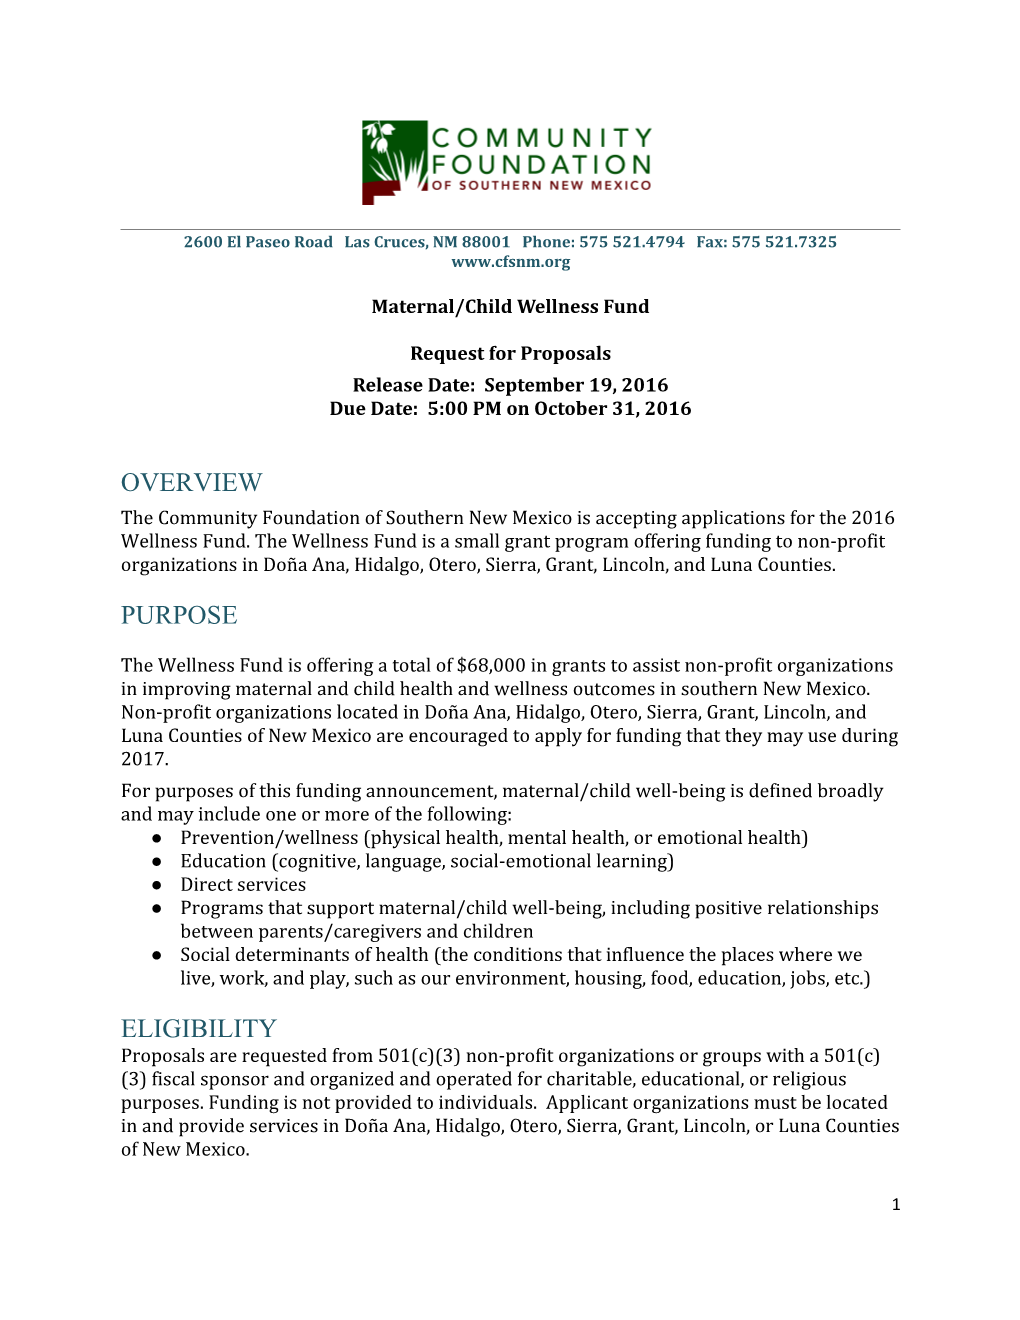 Community Foundation of Southern New Mexico